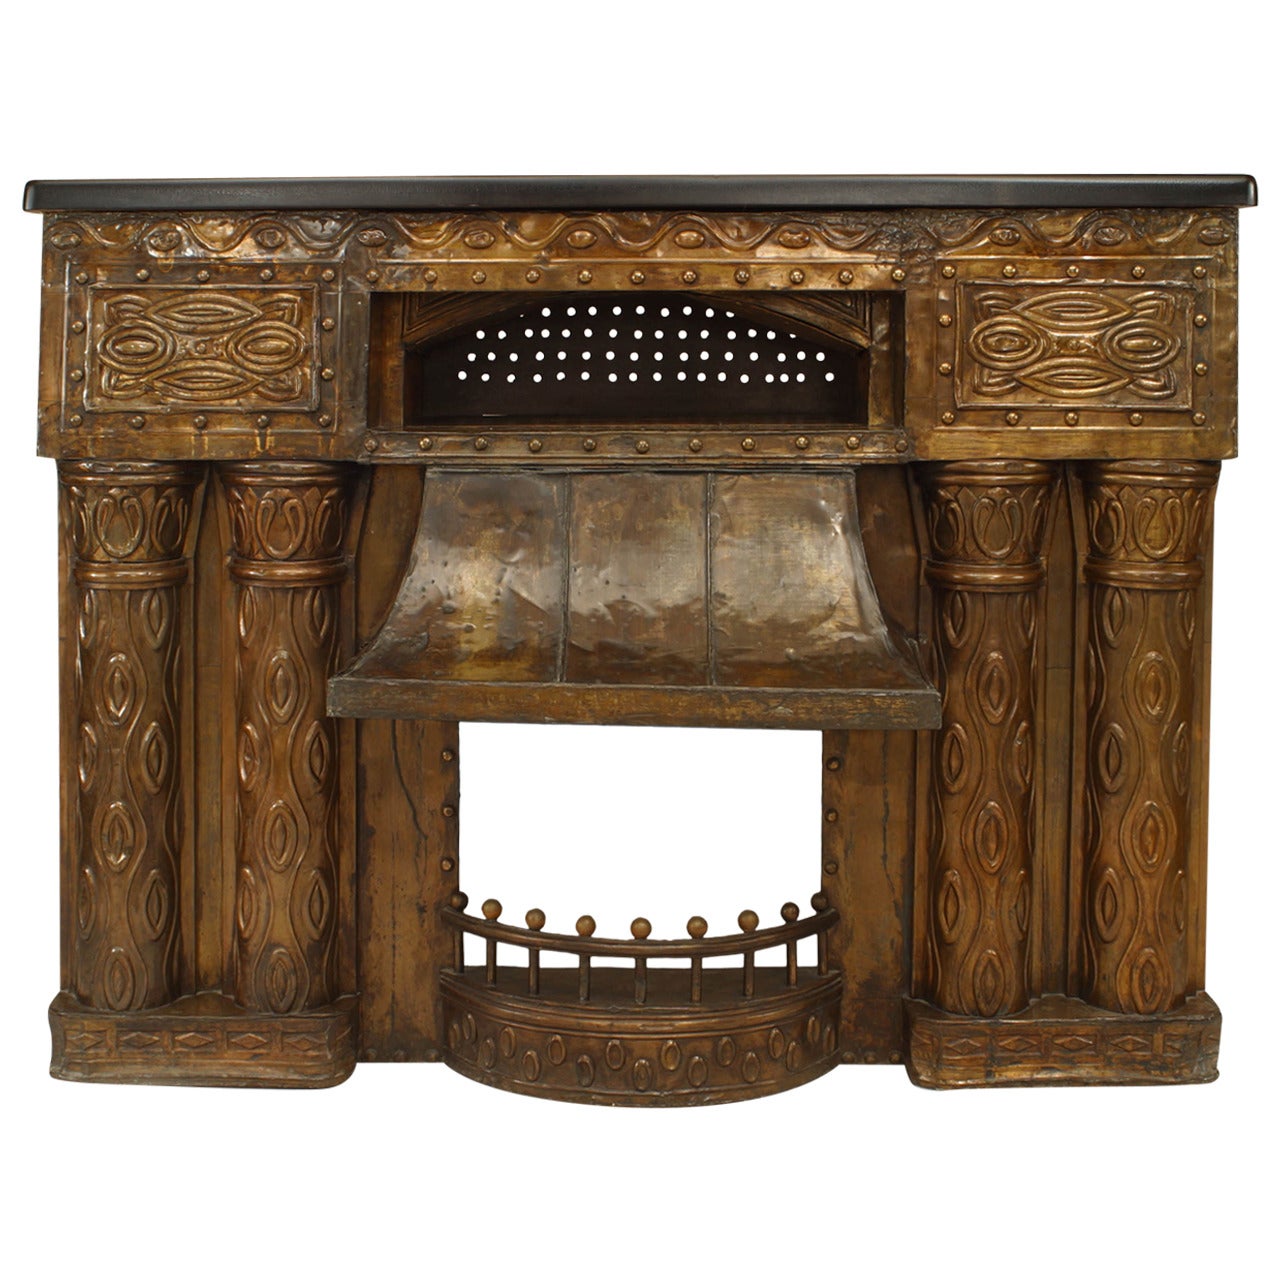 Austrian Secessionist Embossed Brass Fireplace